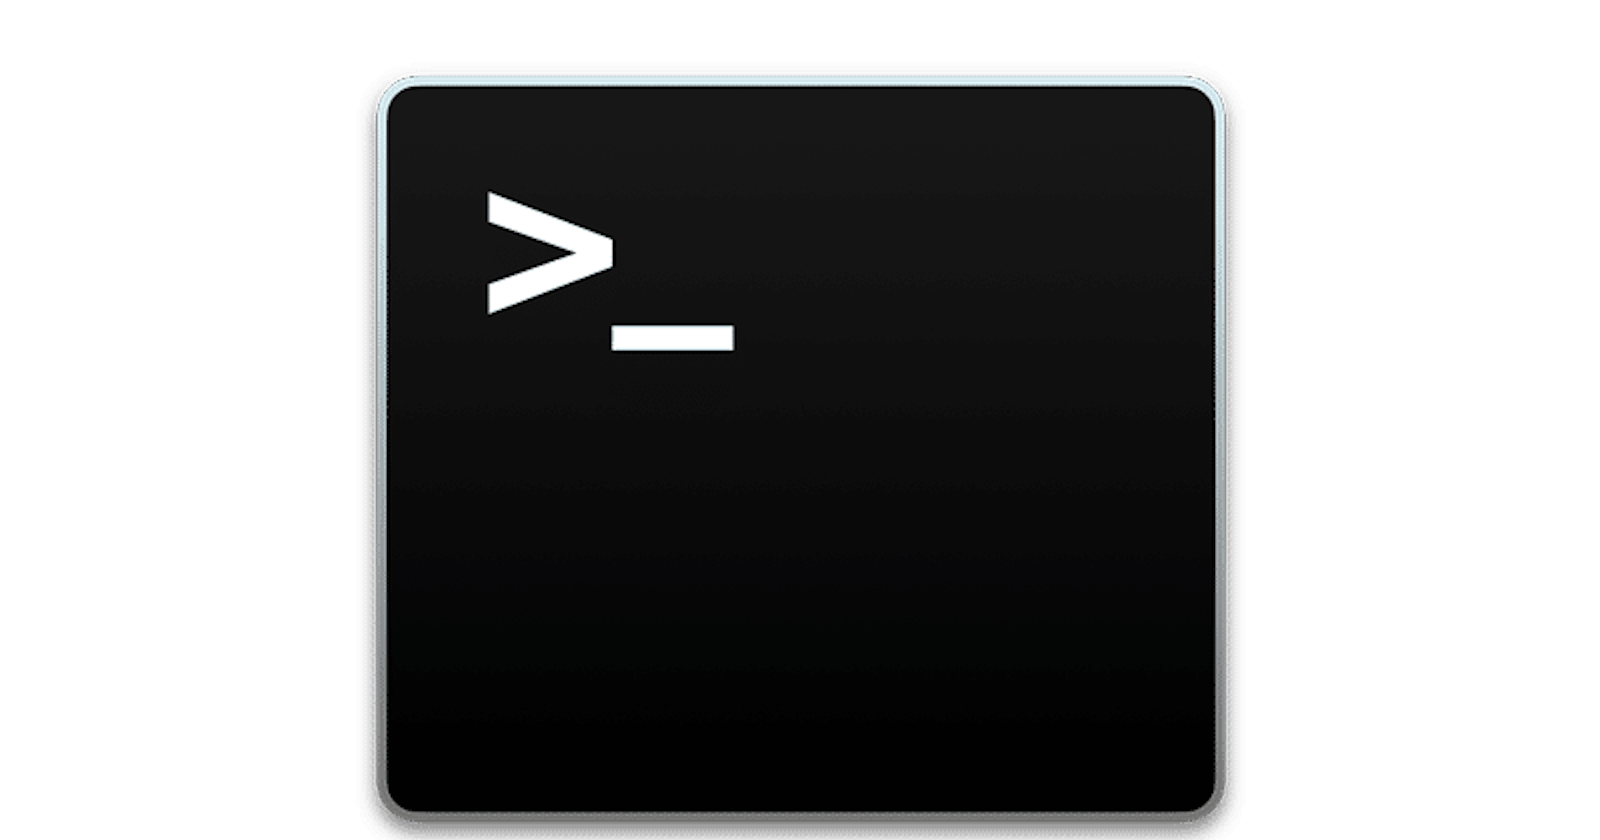 Introduction to unix, and basic shell commands.